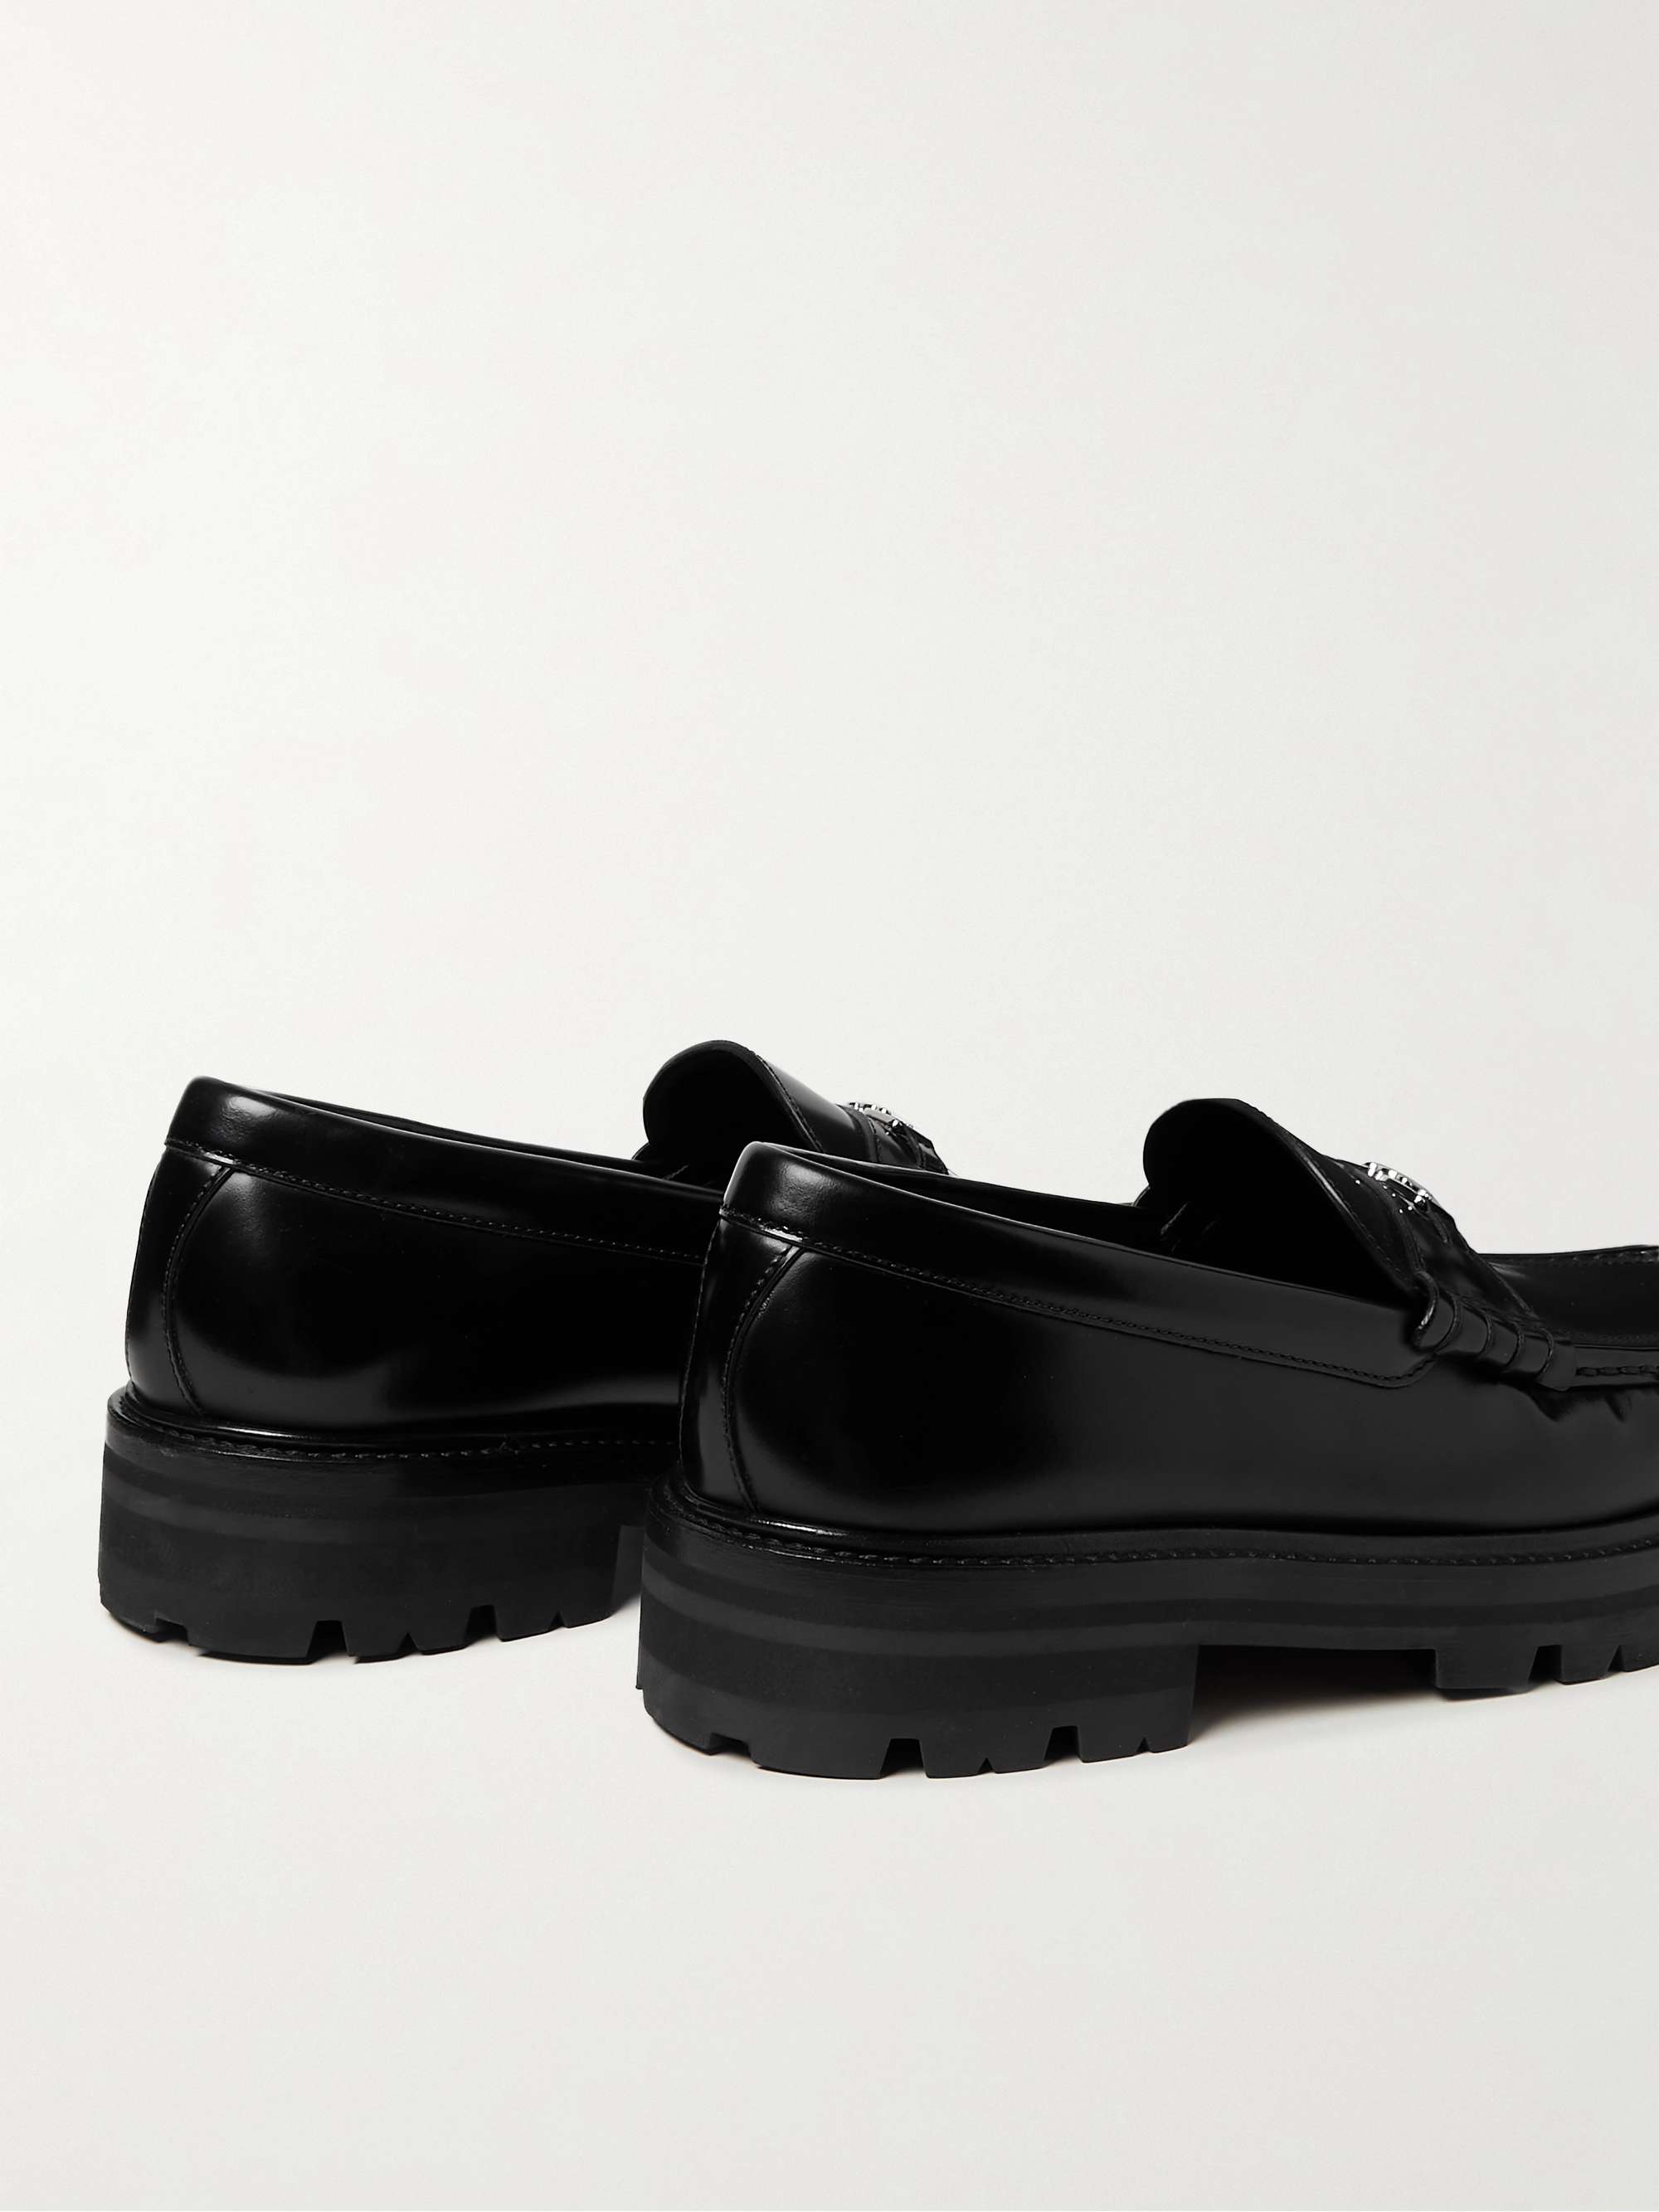 CELINE HOMME Triomphe Leather Loafers